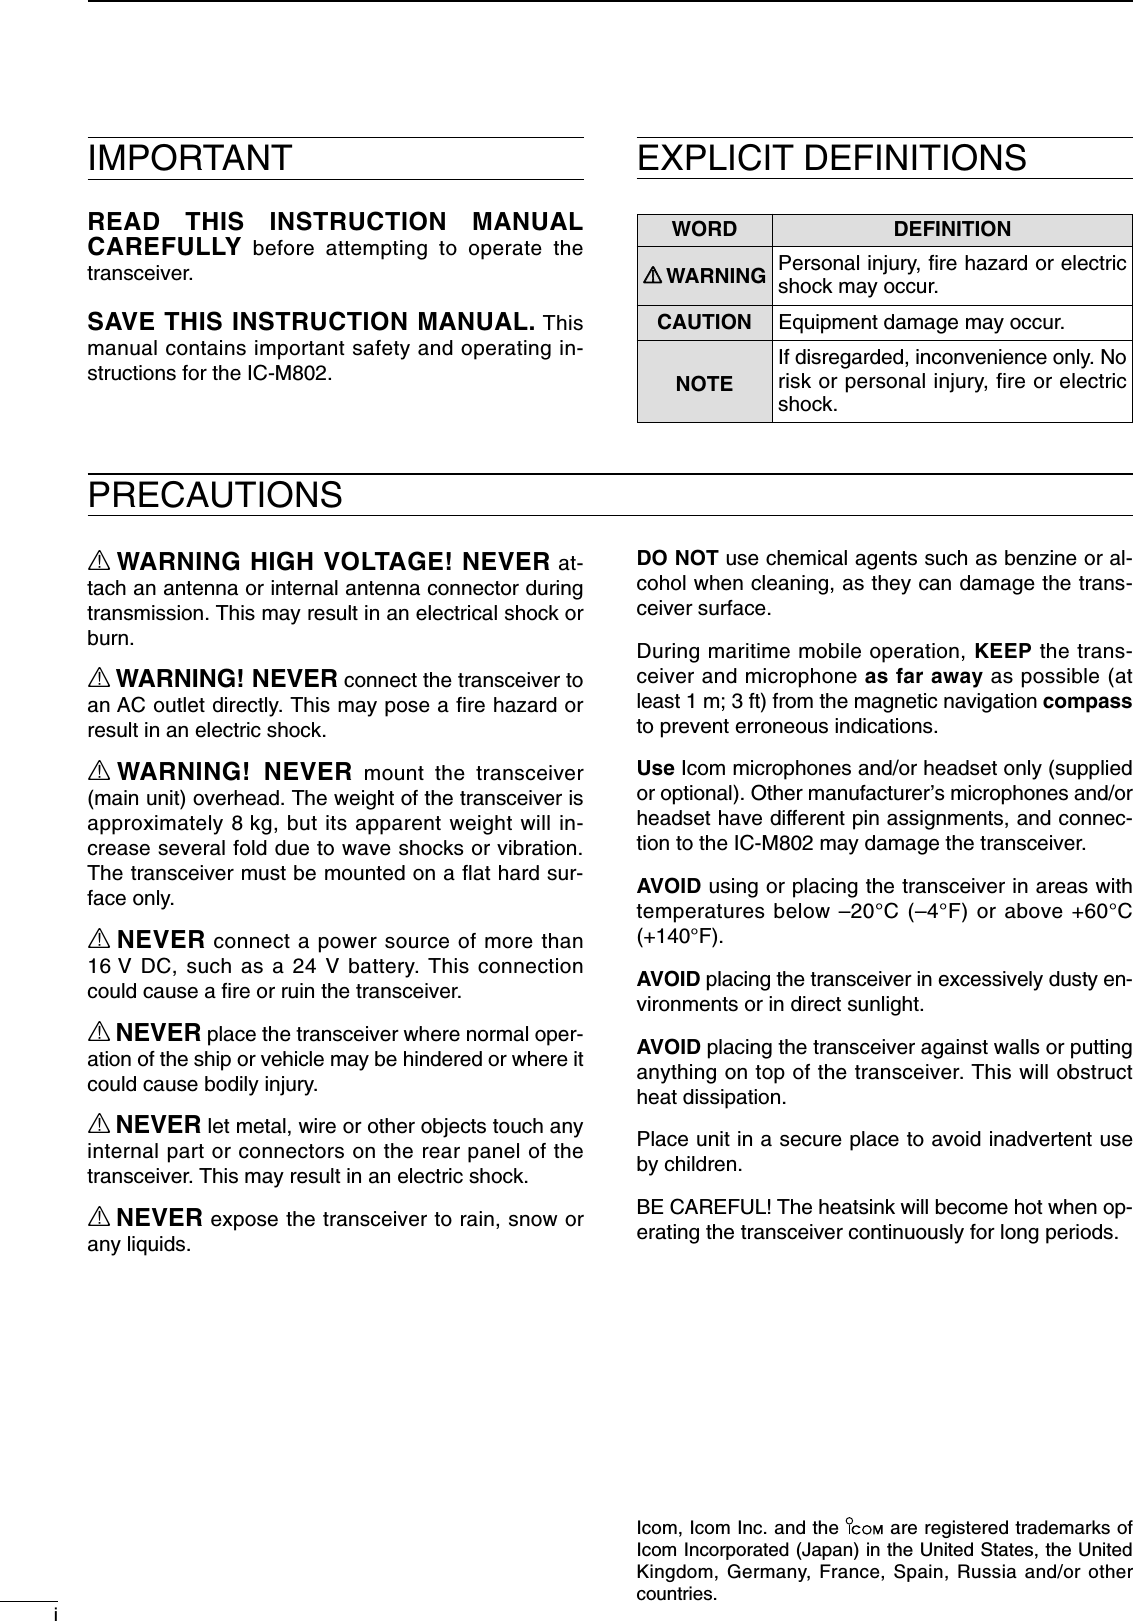 iIMPORTANTREAD THIS INSTRUCTION MANUALCAREFULLY before attempting to operate thetransceiver.SAVE THIS INSTRUCTION MANUAL. Thismanual contains important safety and operating in-structions for the IC-M802.EXPLICIT DEFINITIONSRWARNING HIGH VOLTAGE! NEVER at-tach an antenna or internal antenna connector duringtransmission. This may result in an electrical shock orburn.RWARNING! NEVER connect the transceiver toan AC outlet directly. This may pose a fire hazard orresult in an electric shock.RWARNING! NEVER mount the transceiver(main unit) overhead. The weight of the transceiver isapproximately 8 kg, but its apparent weight will in-crease several fold due to wave shocks or vibration.The transceiver must be mounted on a ﬂat hard sur-face only.RNEVER connect a power source of more than16 V DC, such as a 24 V battery. This connectioncould cause a ﬁre or ruin the transceiver.RNEVER place the transceiver where normal oper-ation of the ship or vehicle may be hindered or where itcould cause bodily injury.RNEVER let metal, wire or other objects touch anyinternal part or connectors on the rear panel of thetransceiver. This may result in an electric shock.RNEVER expose the transceiver to rain, snow orany liquids.DO NOT use chemical agents such as benzine or al-cohol when cleaning, as they can damage the trans-ceiver surface.During maritime mobile operation, KEEP the trans-ceiver and microphone as far away as possible (atleast 1 m; 3 ft) from the magnetic navigation compassto prevent erroneous indications.Use Icom microphones and/or headset only (suppliedor optional). Other manufacturer’s microphones and/orheadset have different pin assignments, and connec-tion to the IC-M802 may damage the transceiver.AVOID using or placing the transceiver in areas withtemperatures below –20°C (–4°F) or above +60°C(+140°F). AVOID placing the transceiver in excessively dusty en-vironments or in direct sunlight.AVOID placing the transceiver against walls or puttinganything on top of the transceiver. This will obstructheat dissipation.Place unit in a secure place to avoid inadvertent useby children.BE CAREFUL! The heatsink will become hot when op-erating the transceiver continuously for long periods.PRECAUTIONSWORD DEFINITIONRRWARNING Personal injury, ﬁre hazard or electricshock may occur.CAUTION Equipment damage may occur.NOTEIf disregarded, inconvenience only. Norisk or personal injury, fire or electricshock.Icom, Icom Inc. and the  are registered trademarks ofIcom Incorporated (Japan) in the United States, the UnitedKingdom, Germany, France, Spain, Russia and/or othercountries.